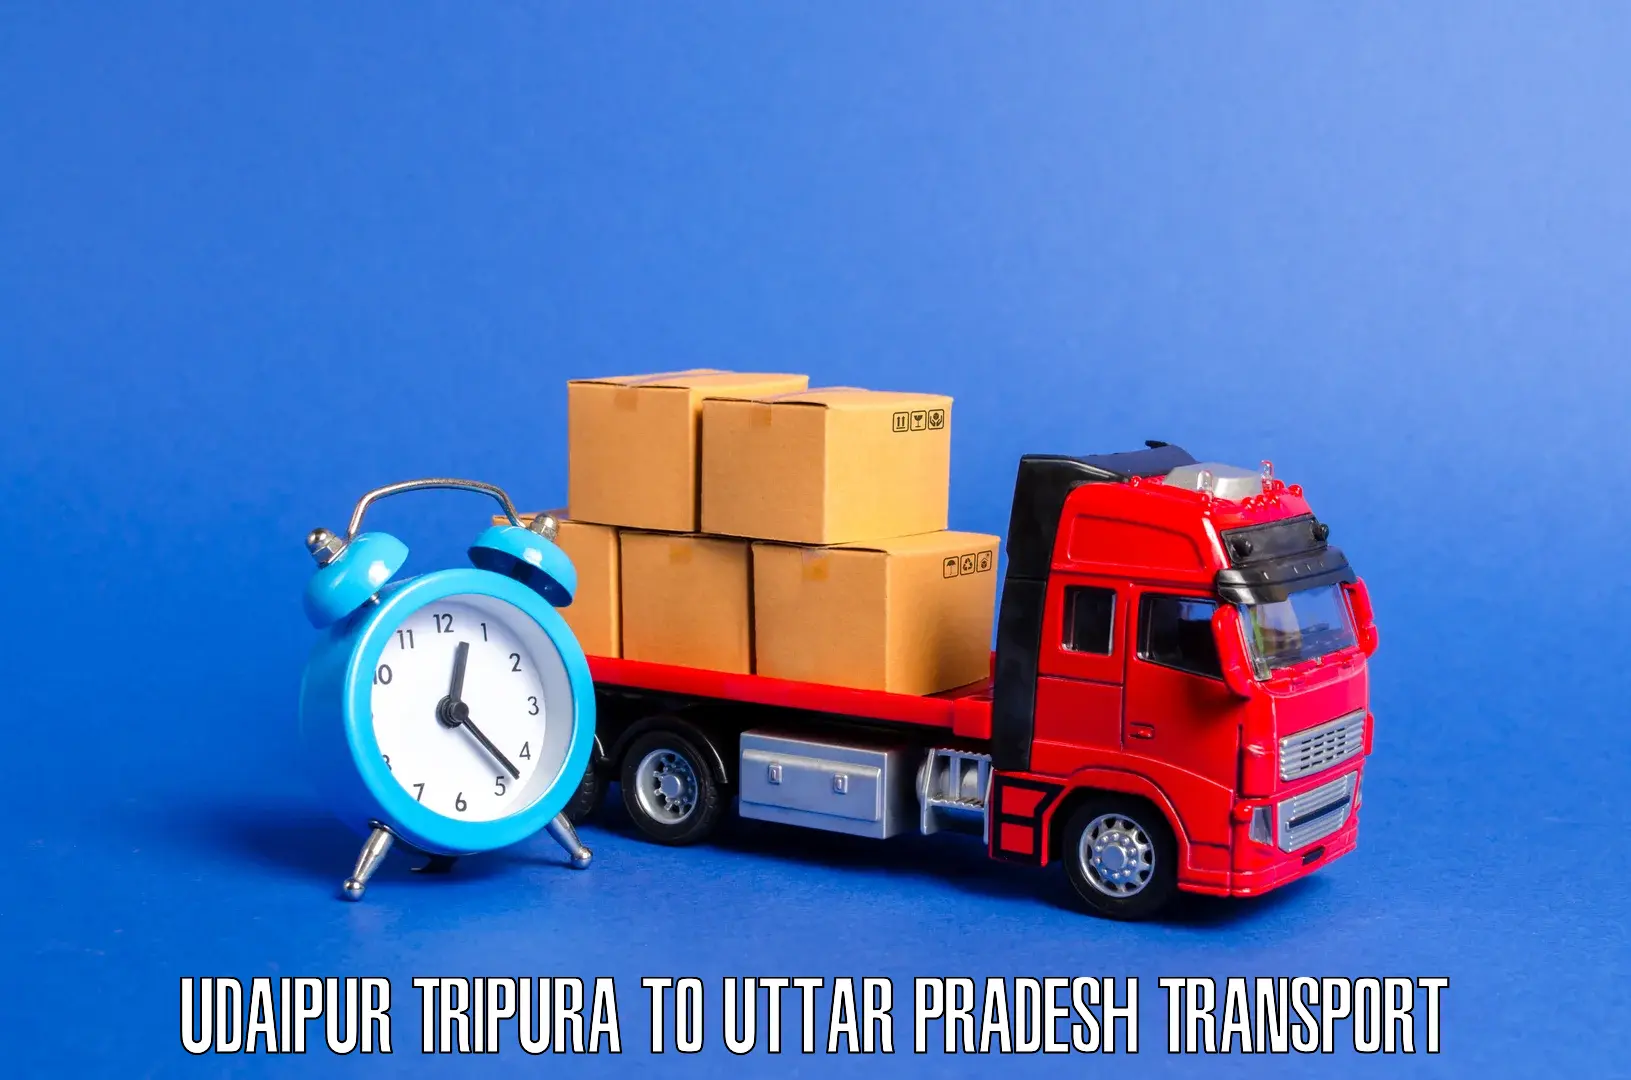 Transport bike from one state to another Udaipur Tripura to Nanpara